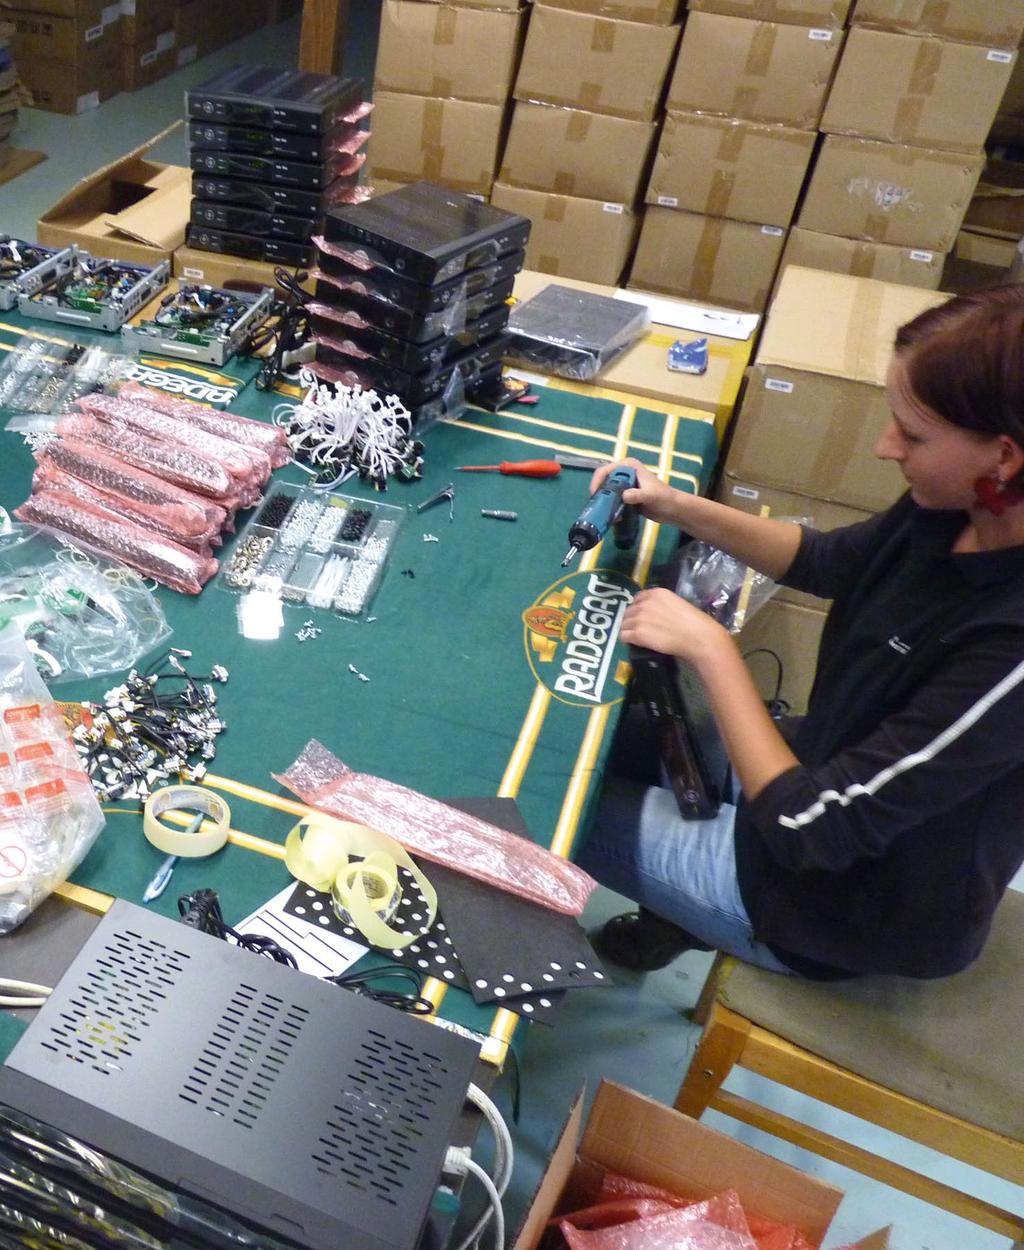 A production employee tests the function of a just-assembled receiver.